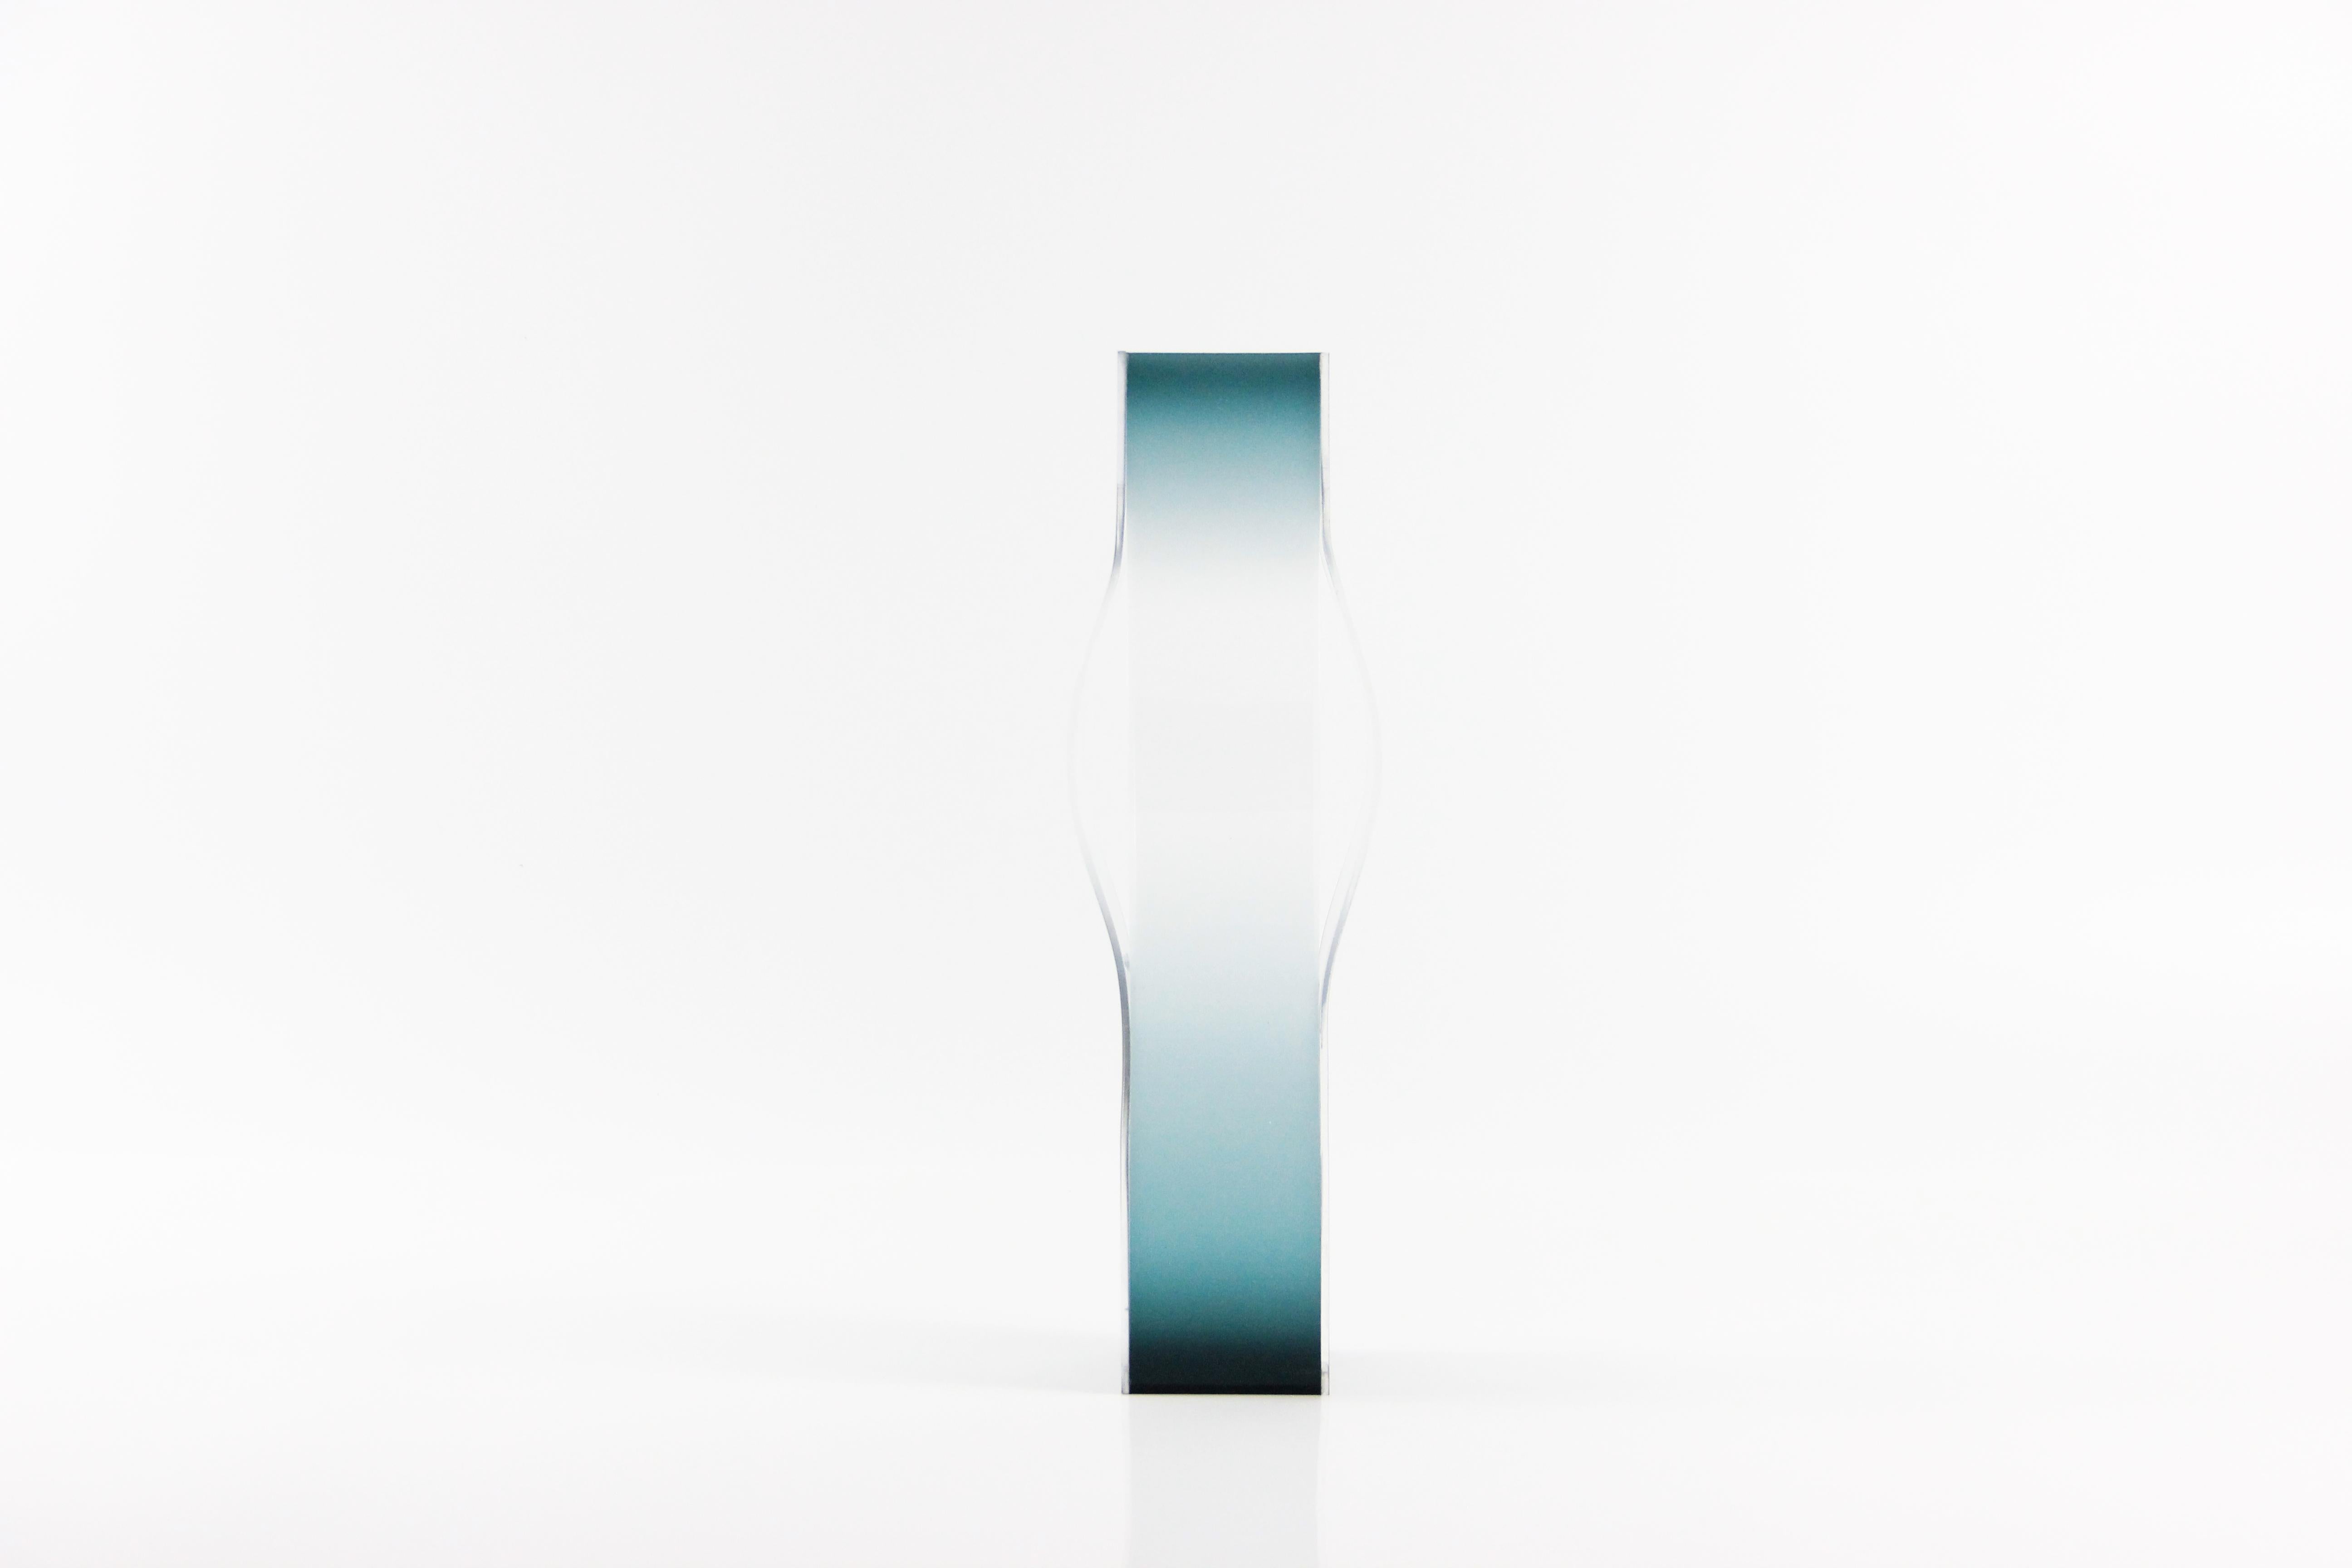 Stretch color is a set of local disappearing vases. The three -sized vases show the strength and change of the color after being stretched in the space.
Through the shape of the curve and the gradient color, the designer makes the vase display a